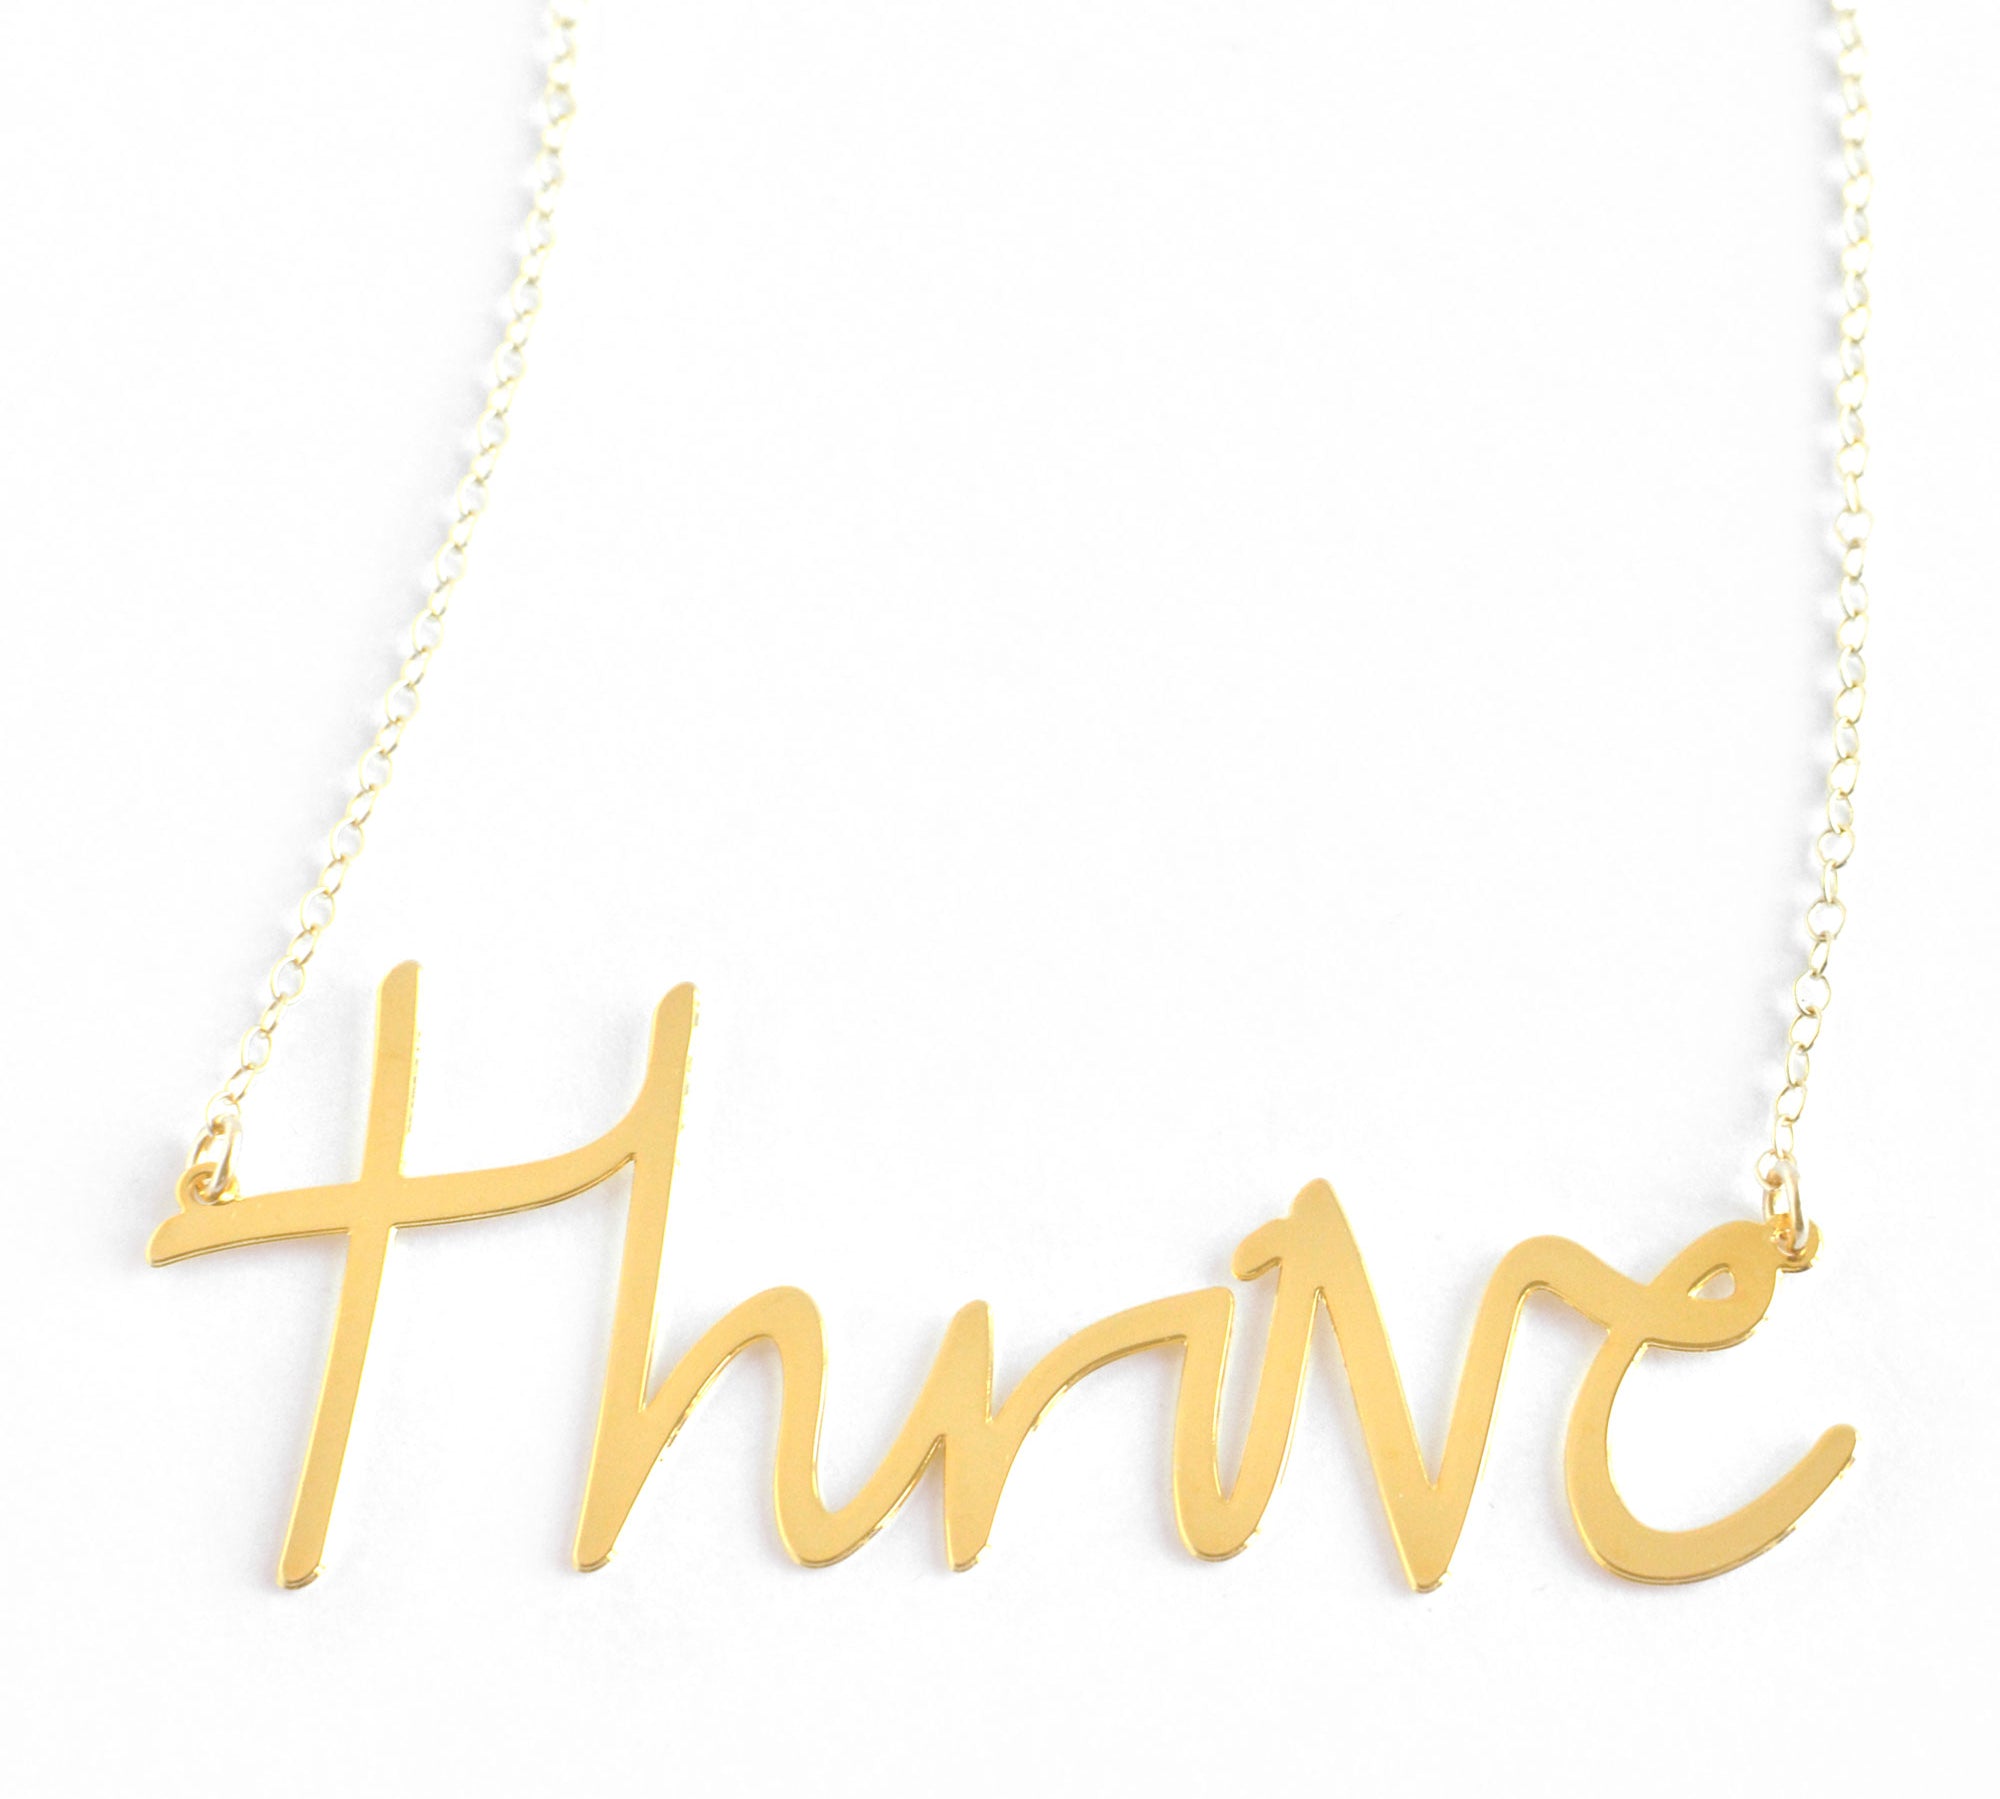 Thrive Necklace - High Quality, Affordable, Hand Written, Self Love, Mantra Word Necklace - Available in Gold and Silver - Small and Large Sizes - Made in USA - Brevity Jewelry